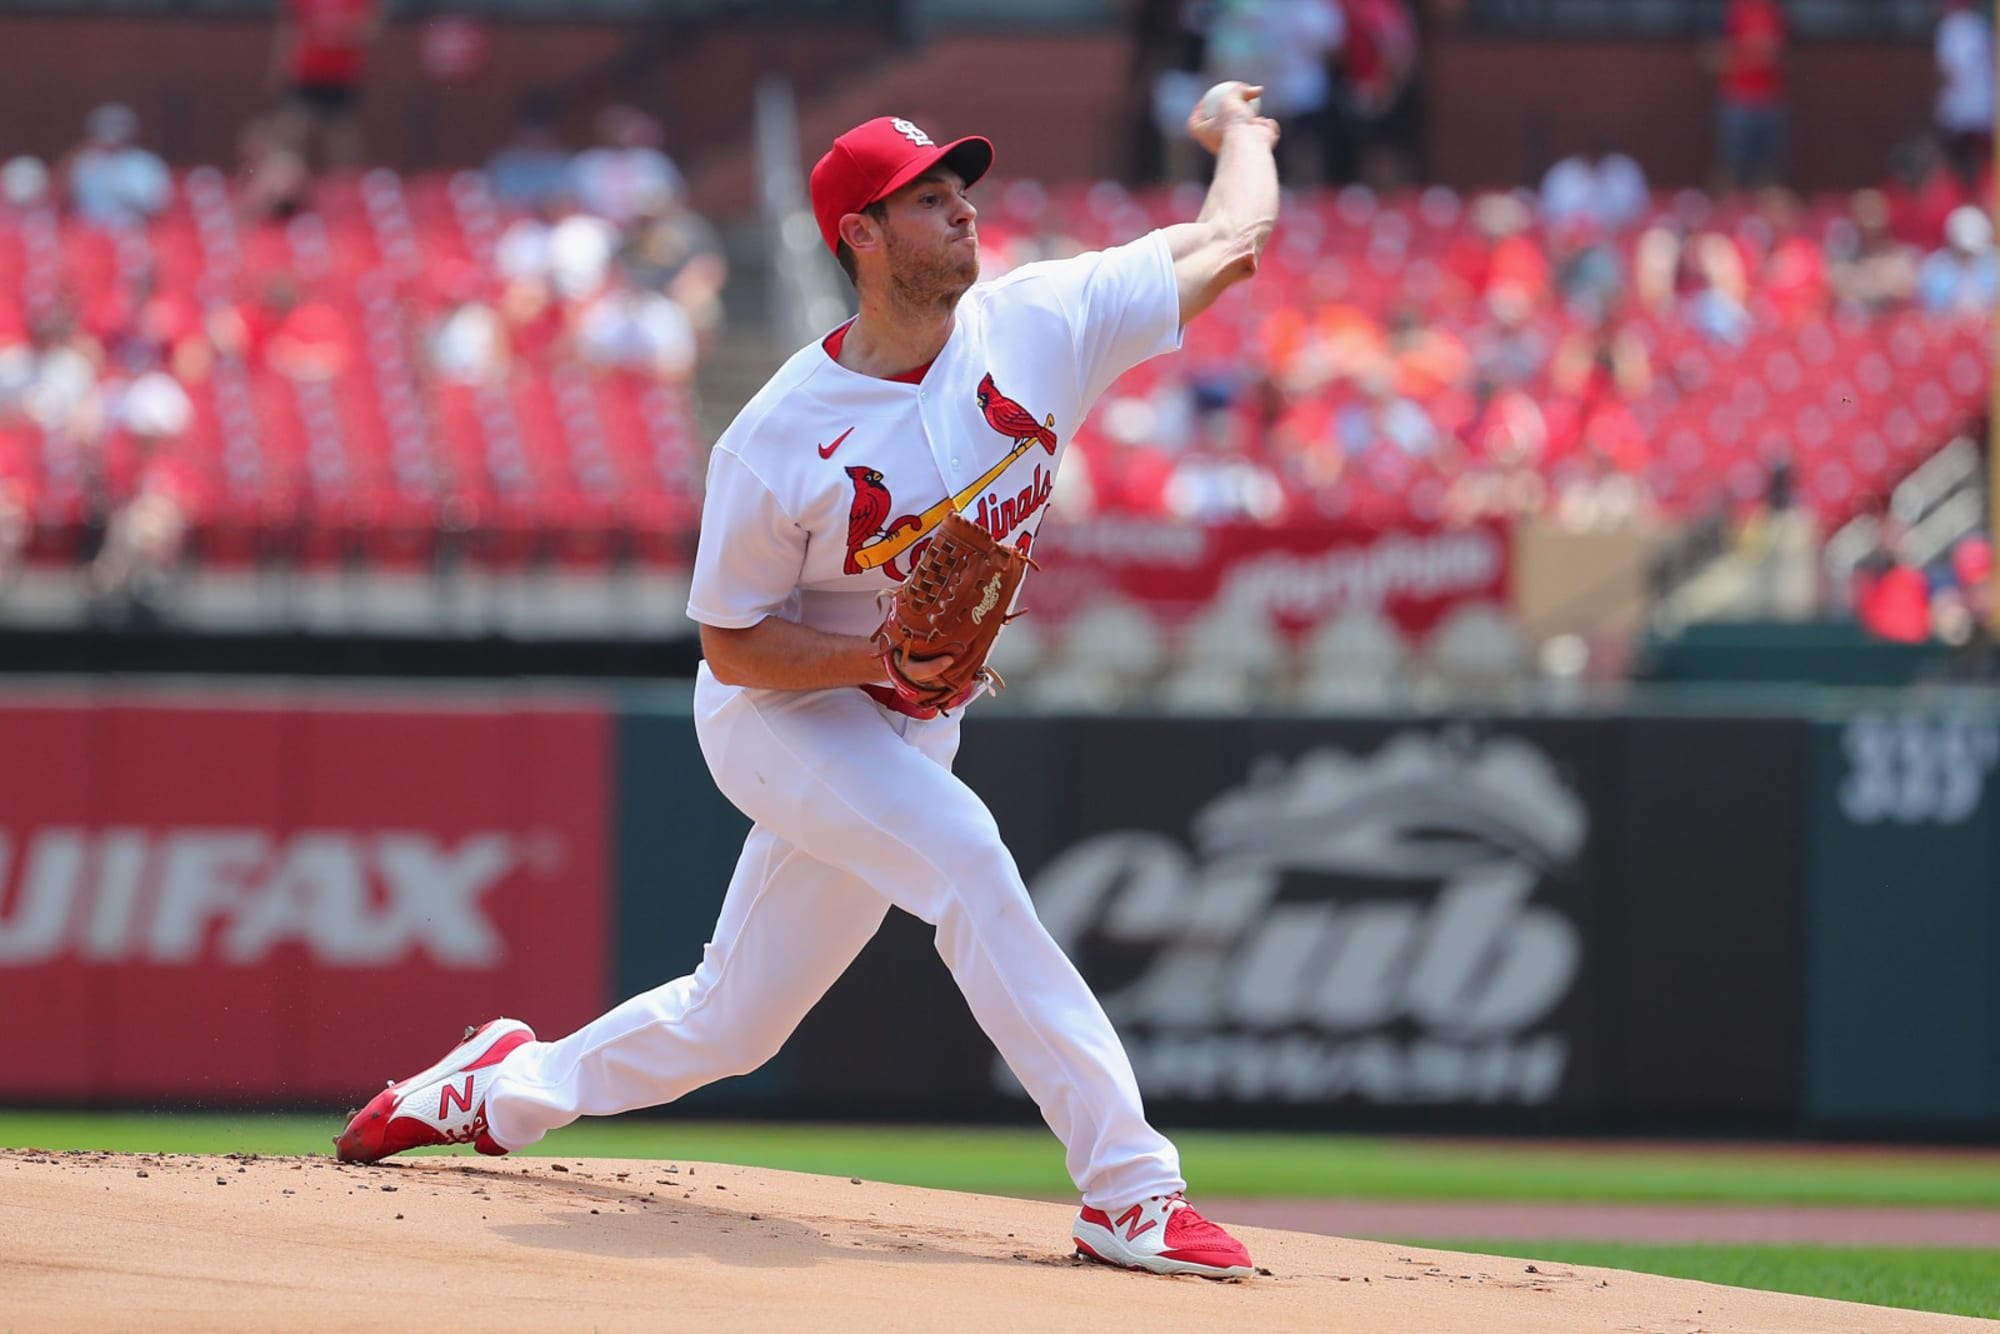 With Steven Matz injured, Cardinals rotation in precarious position